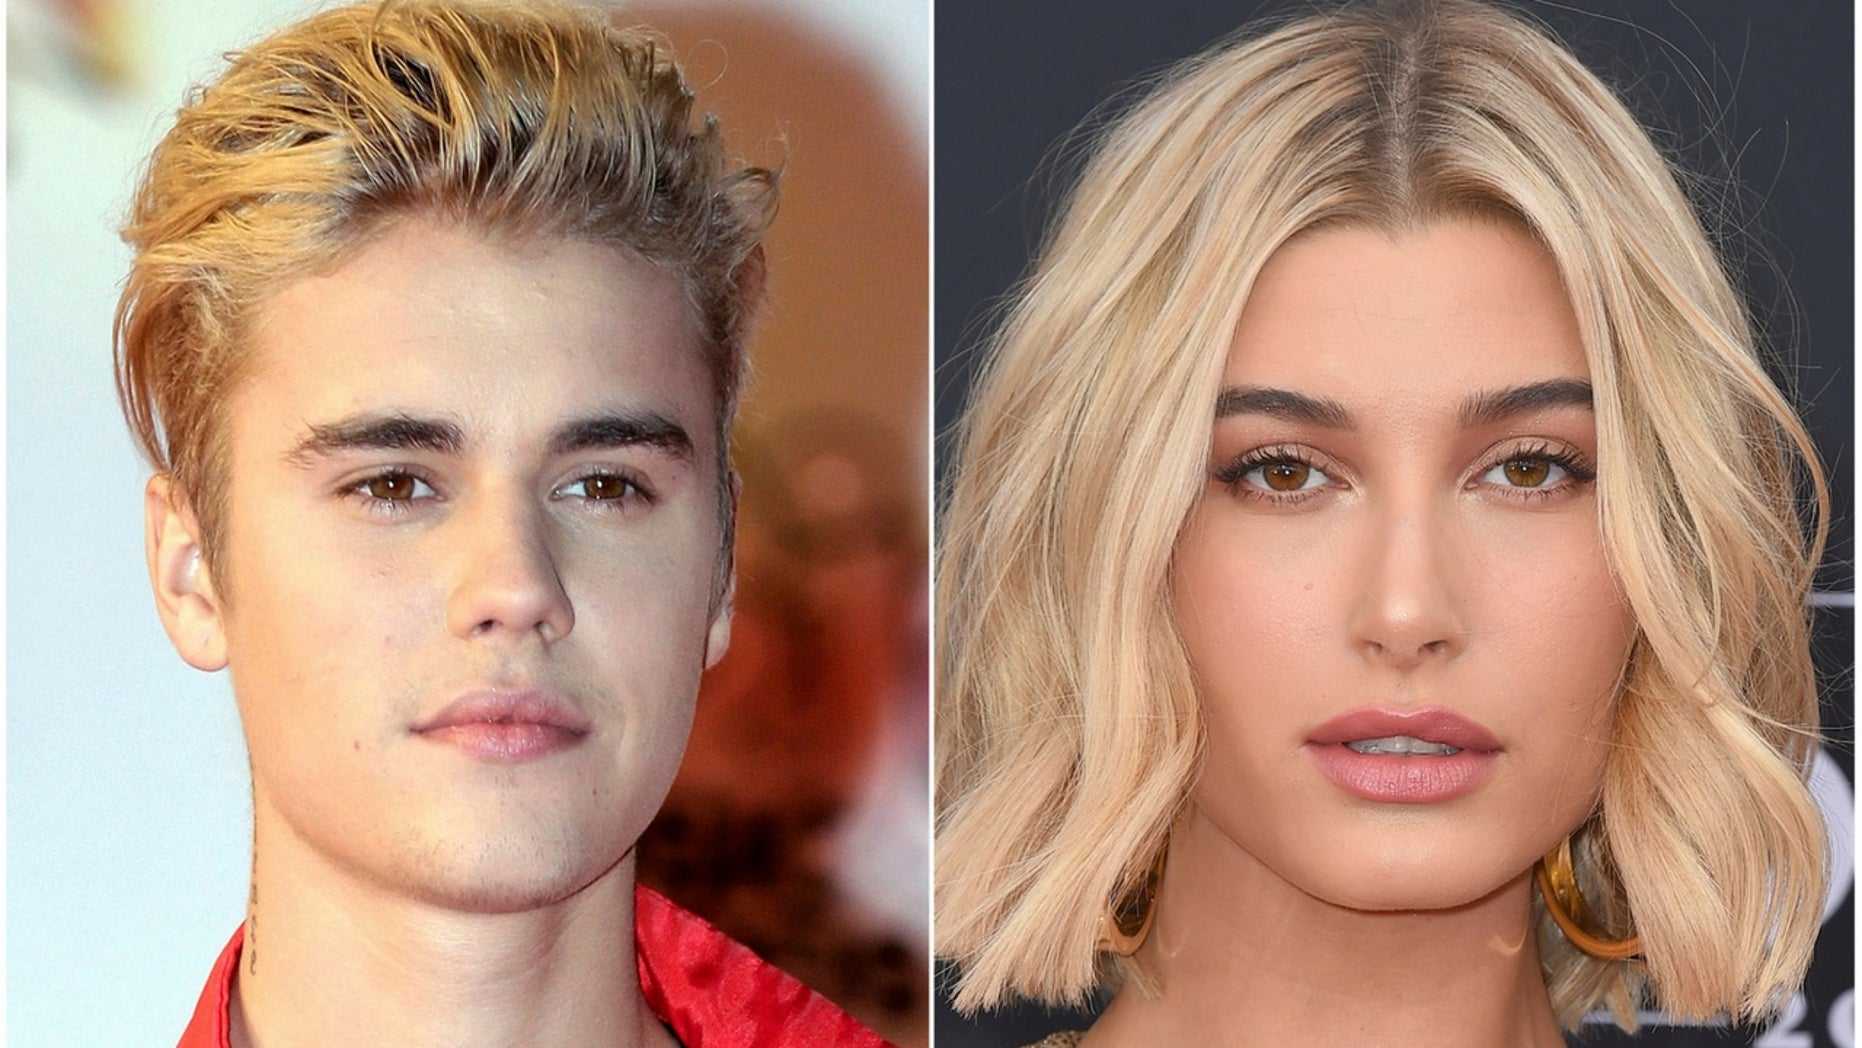 justin bieber gushed over his fiancee hailey baldwin on instagram but the singer does not follow - follow her on instagram